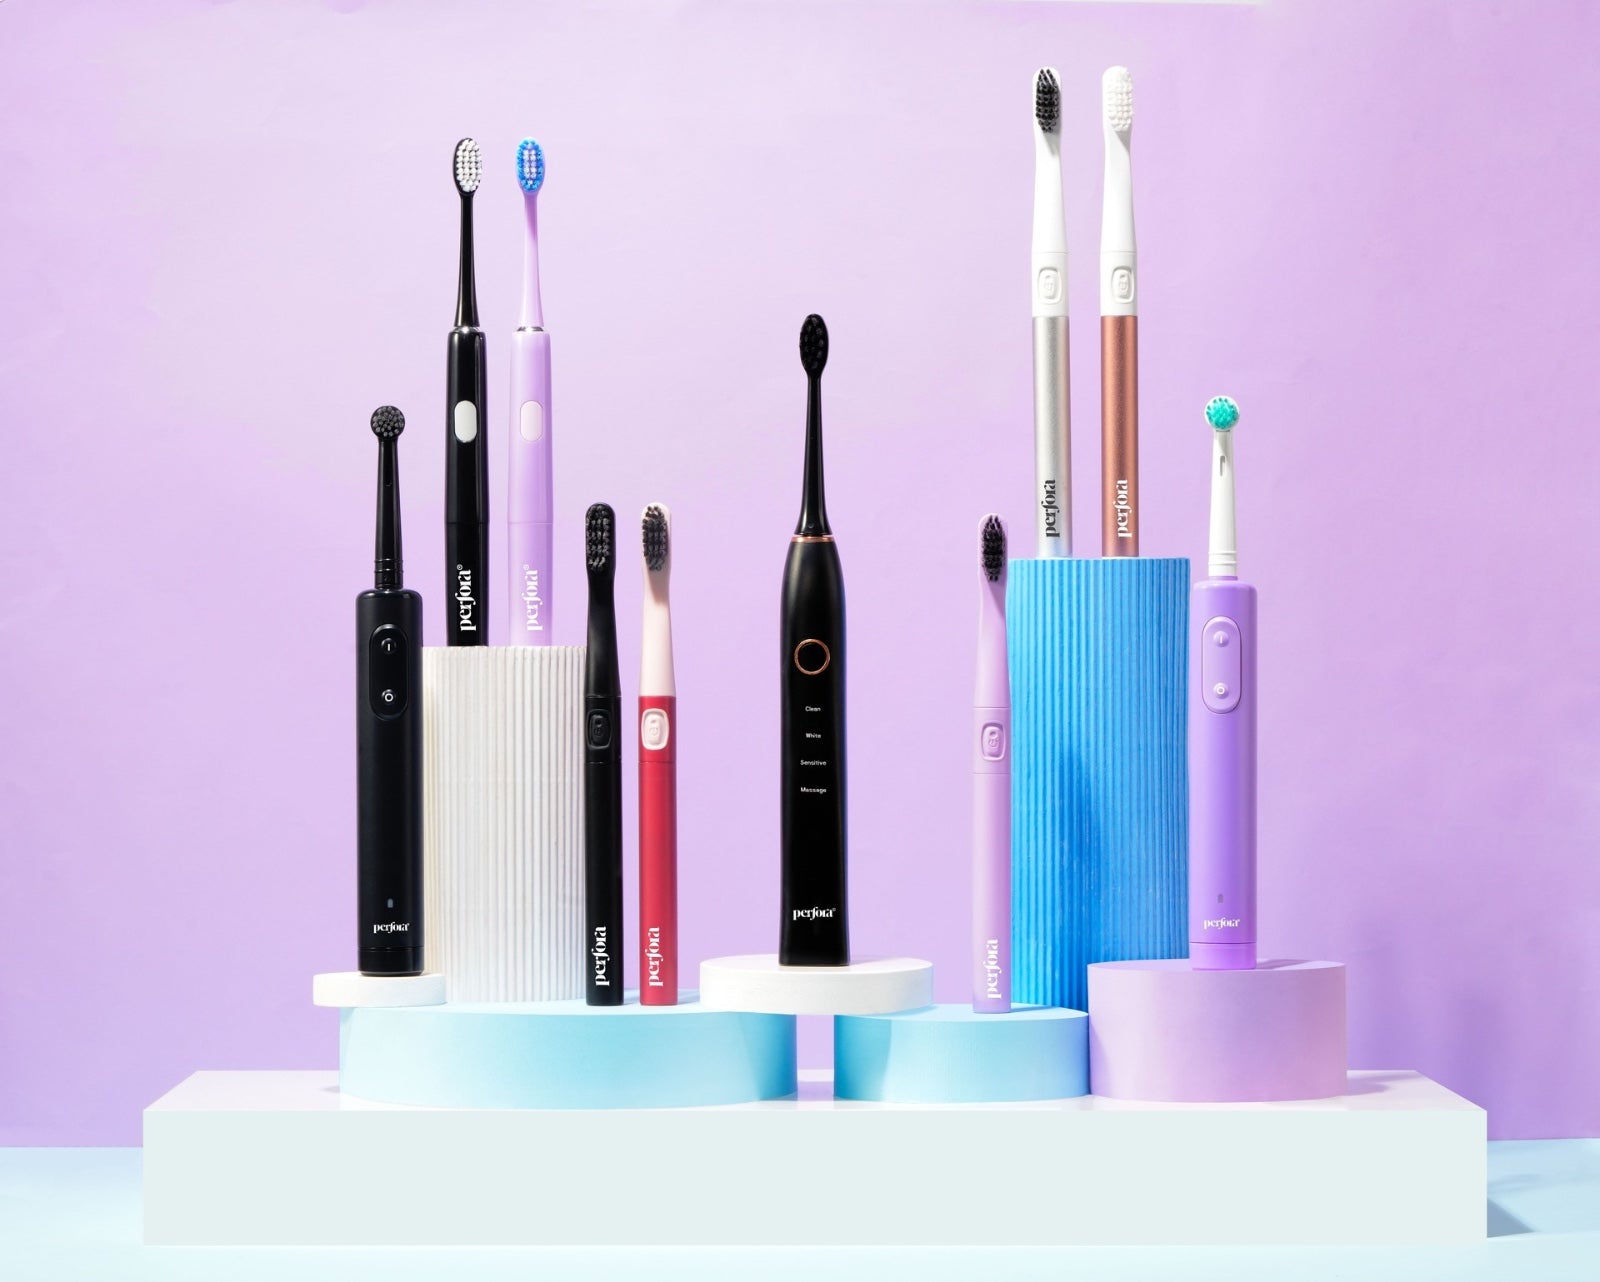 How to find the best electric toothbrush for your needs